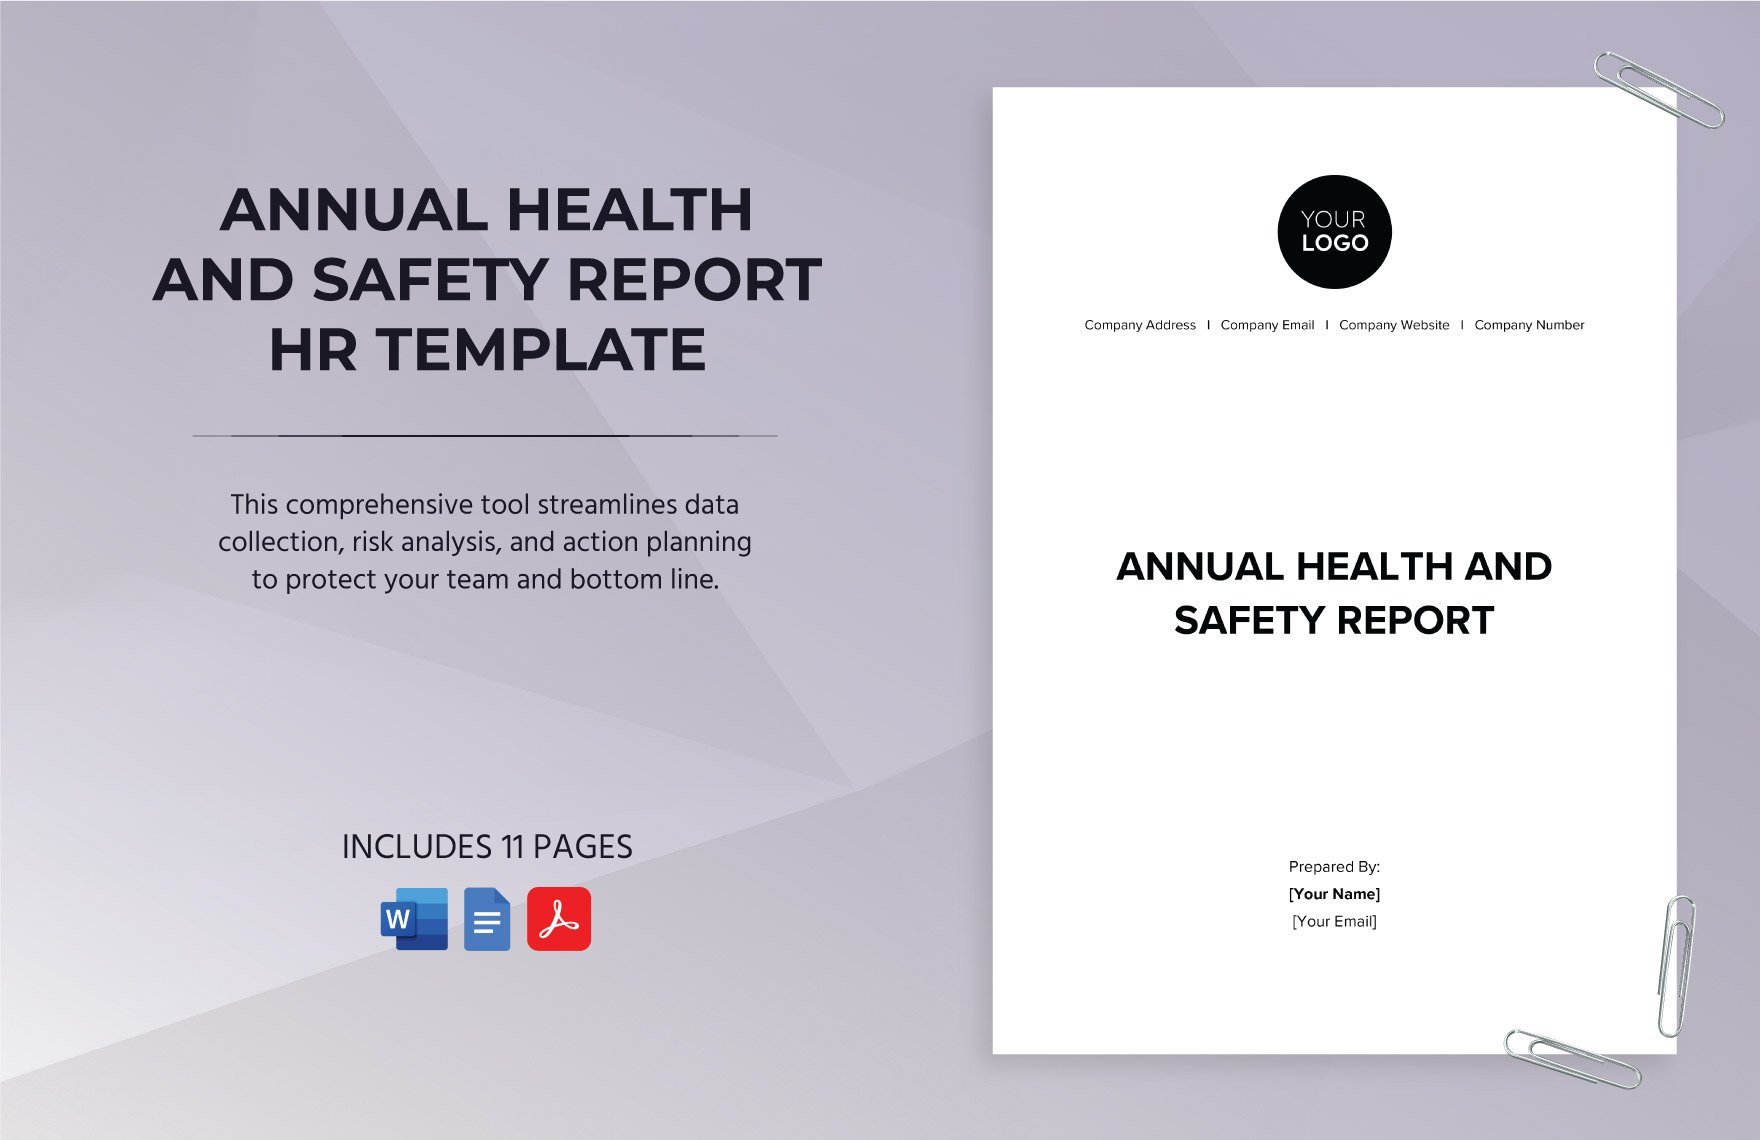 Annual Health and Safety Report HR Template